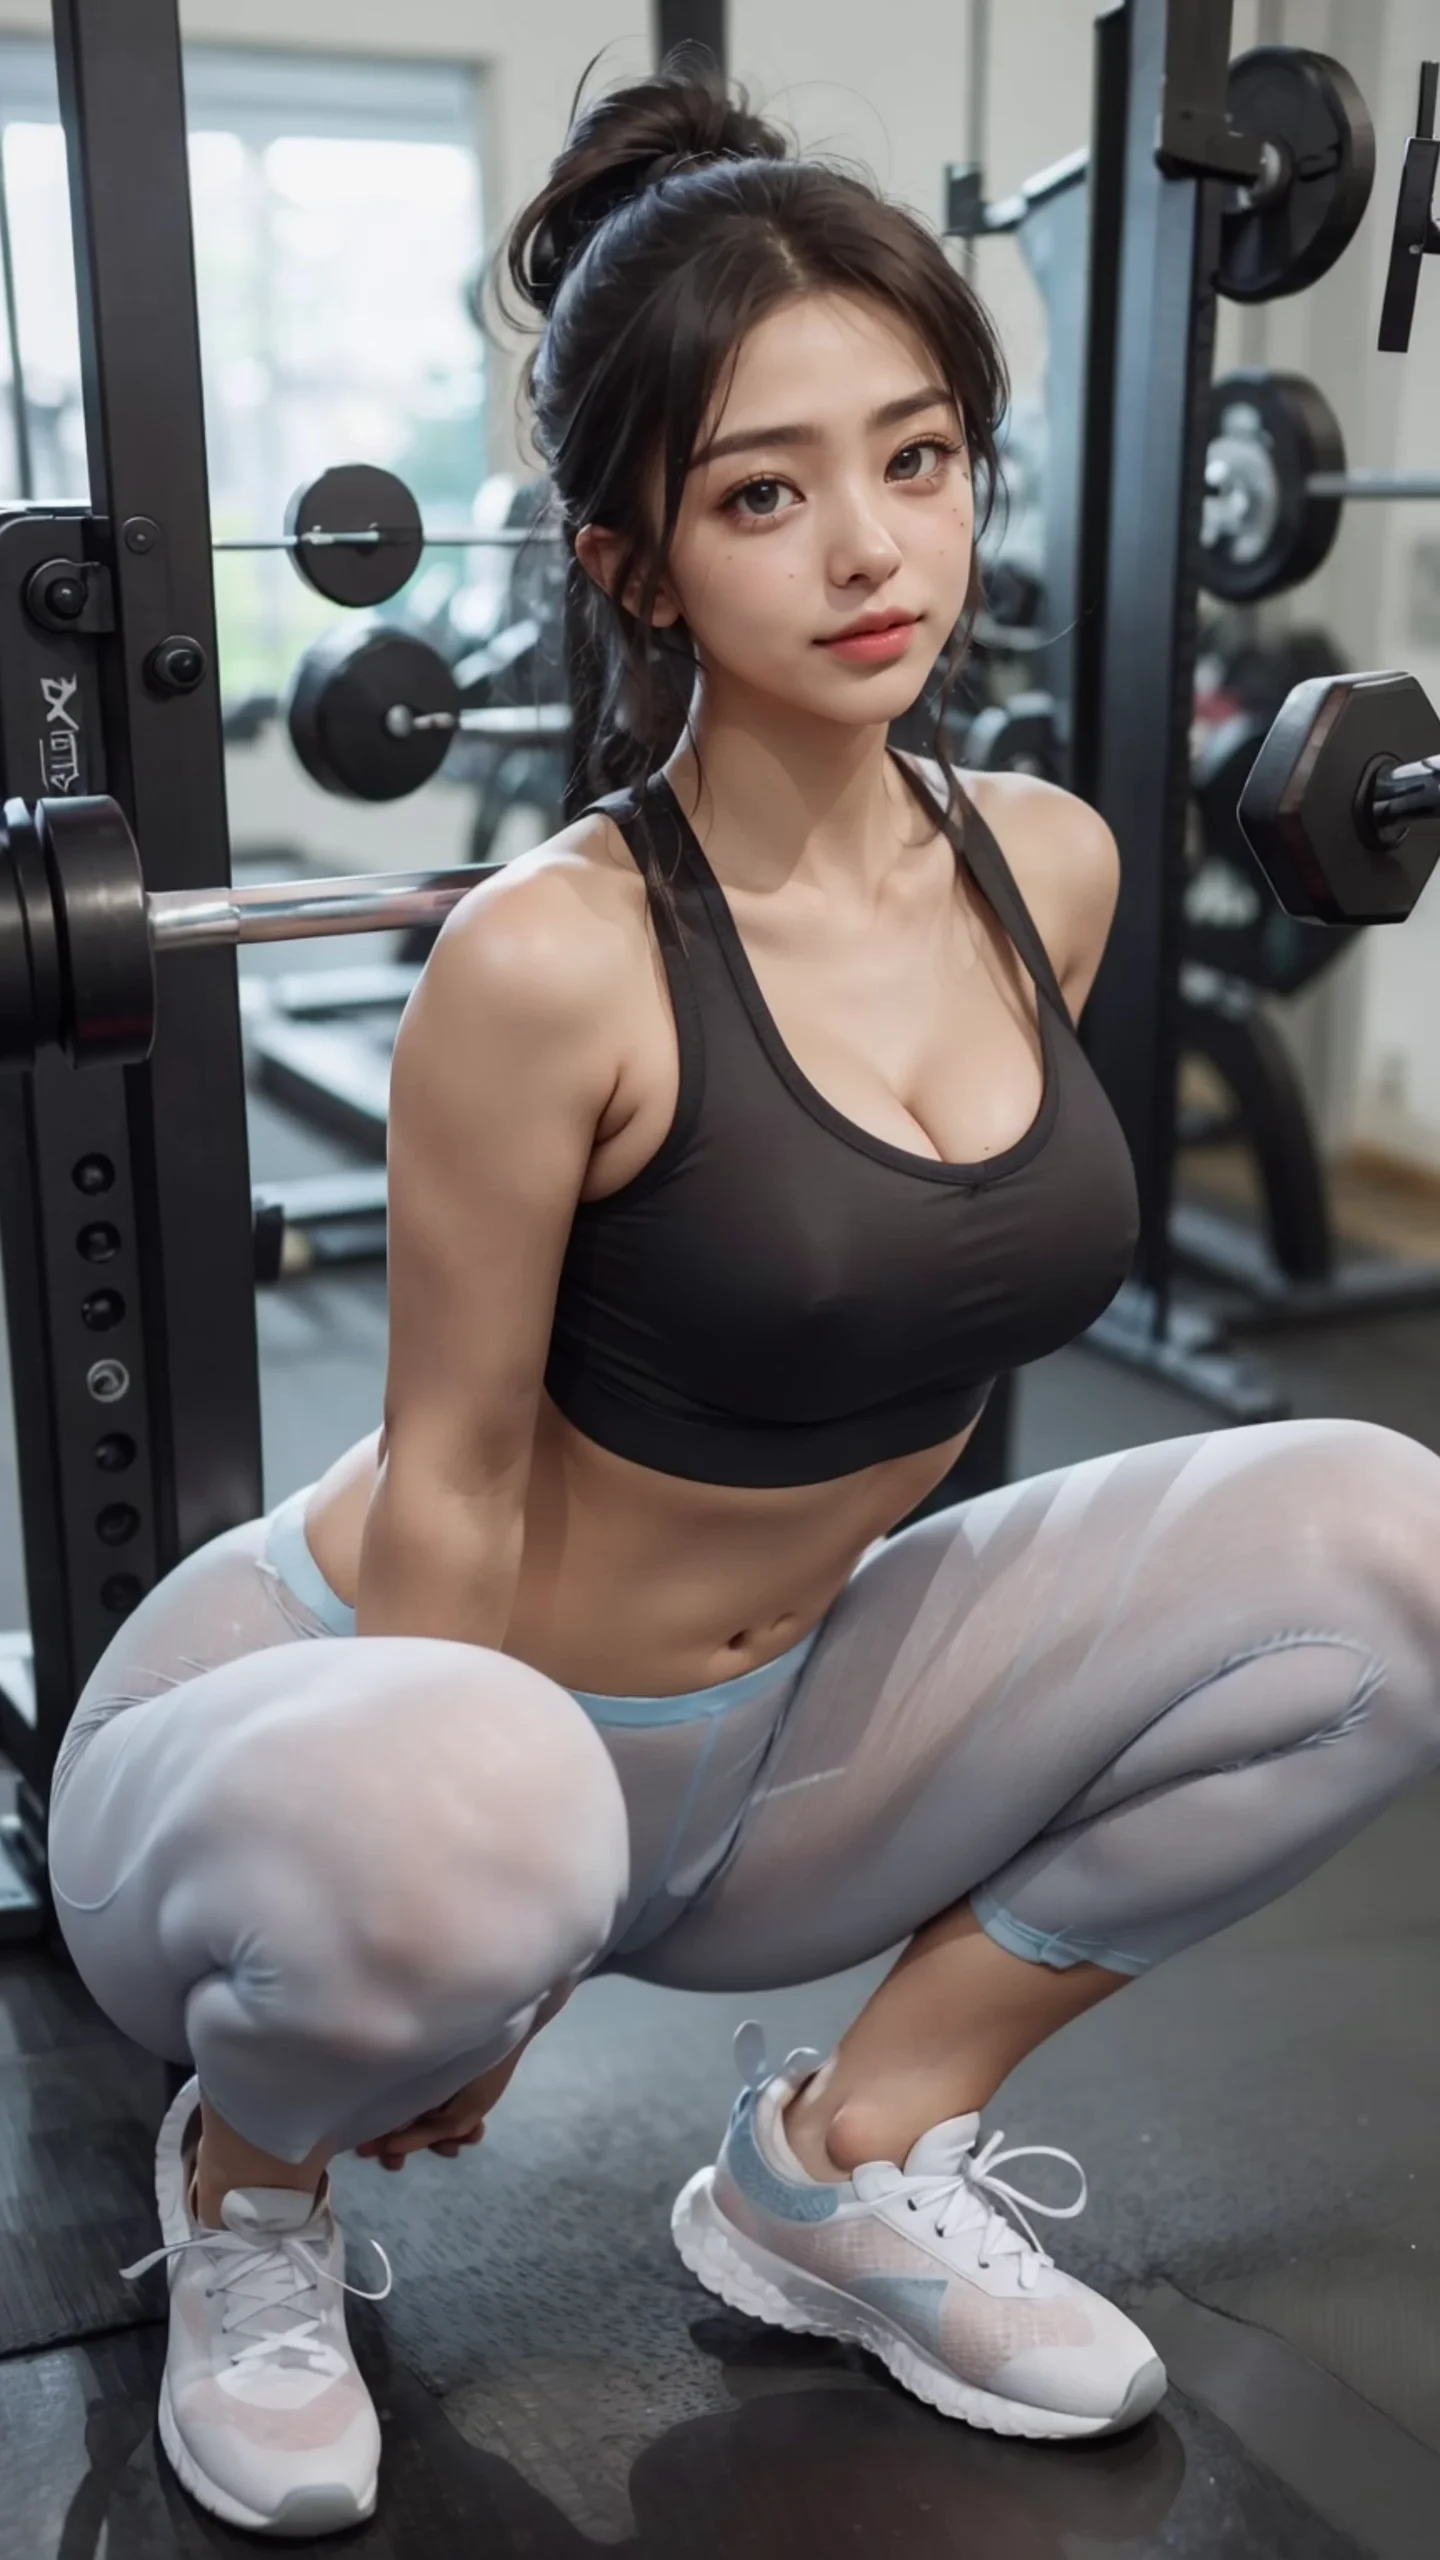 Ai Lookbook: Sexy Gym Girl Images 05